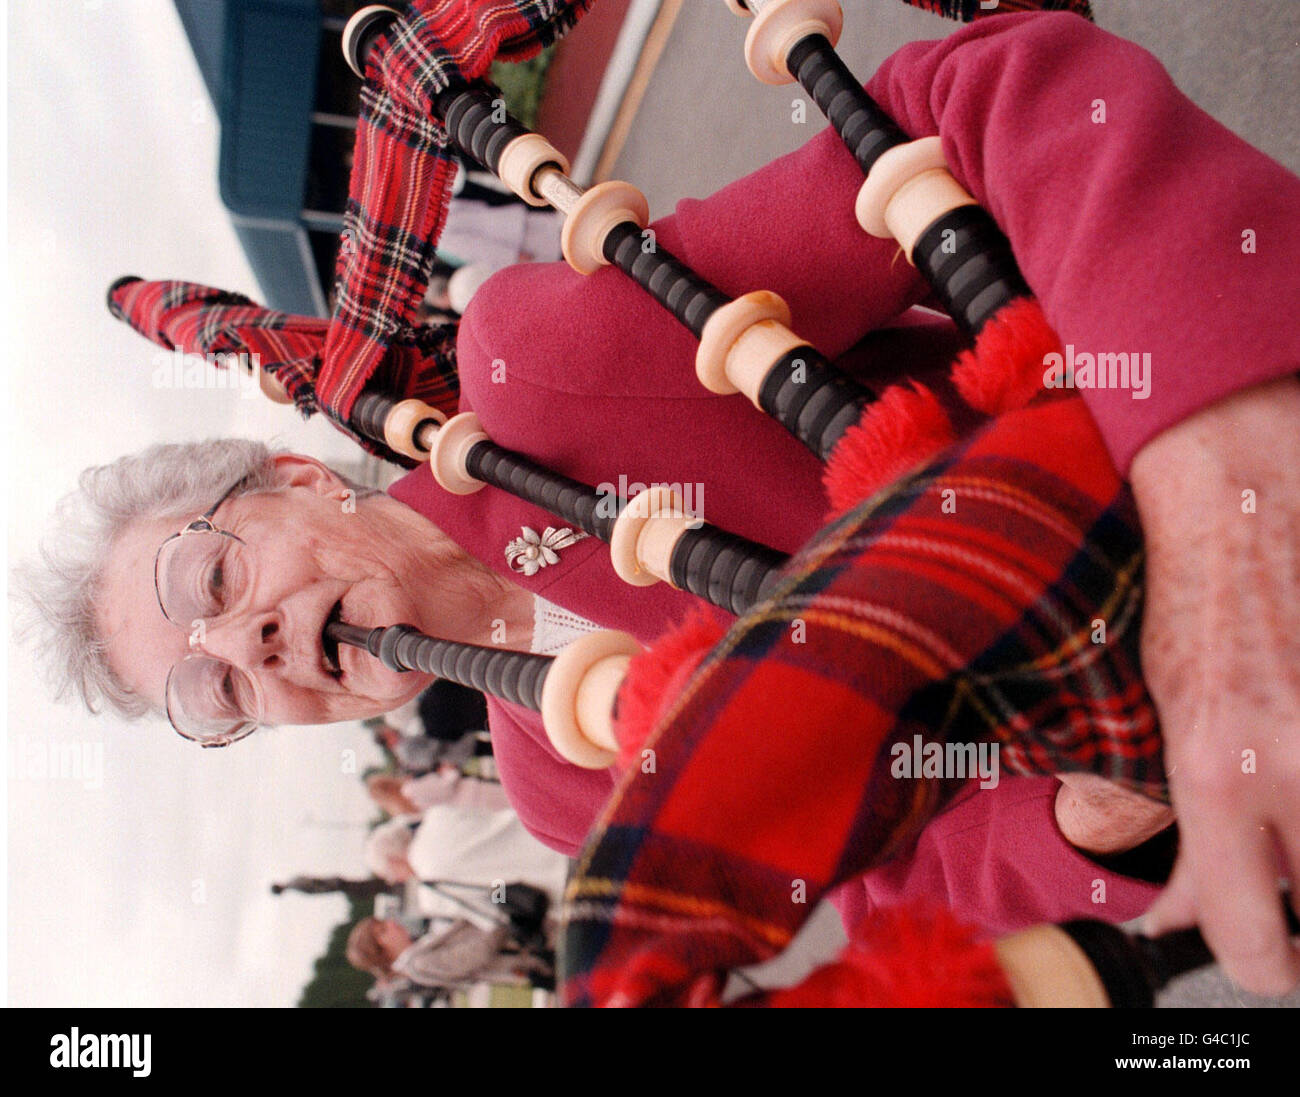 SOCIAL Pipers 2 Stock Photo